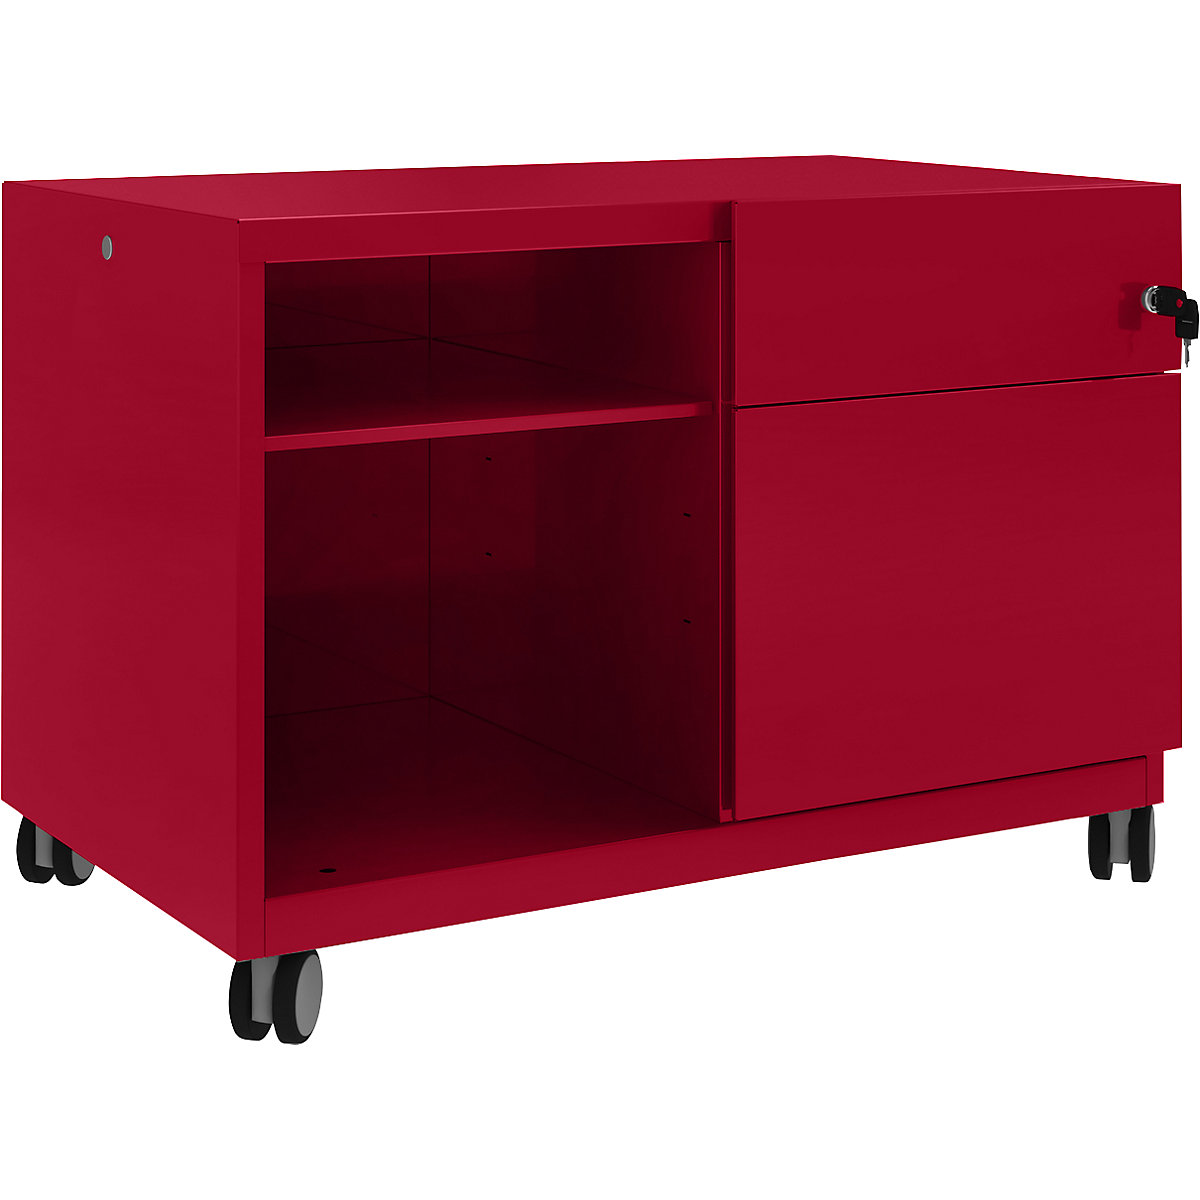 Note™ CADDY, HxBxT 563 x 800 x 490 mm – BISLEY, 1 universal drawer and suspension file drawer on the right, cardinal red-22